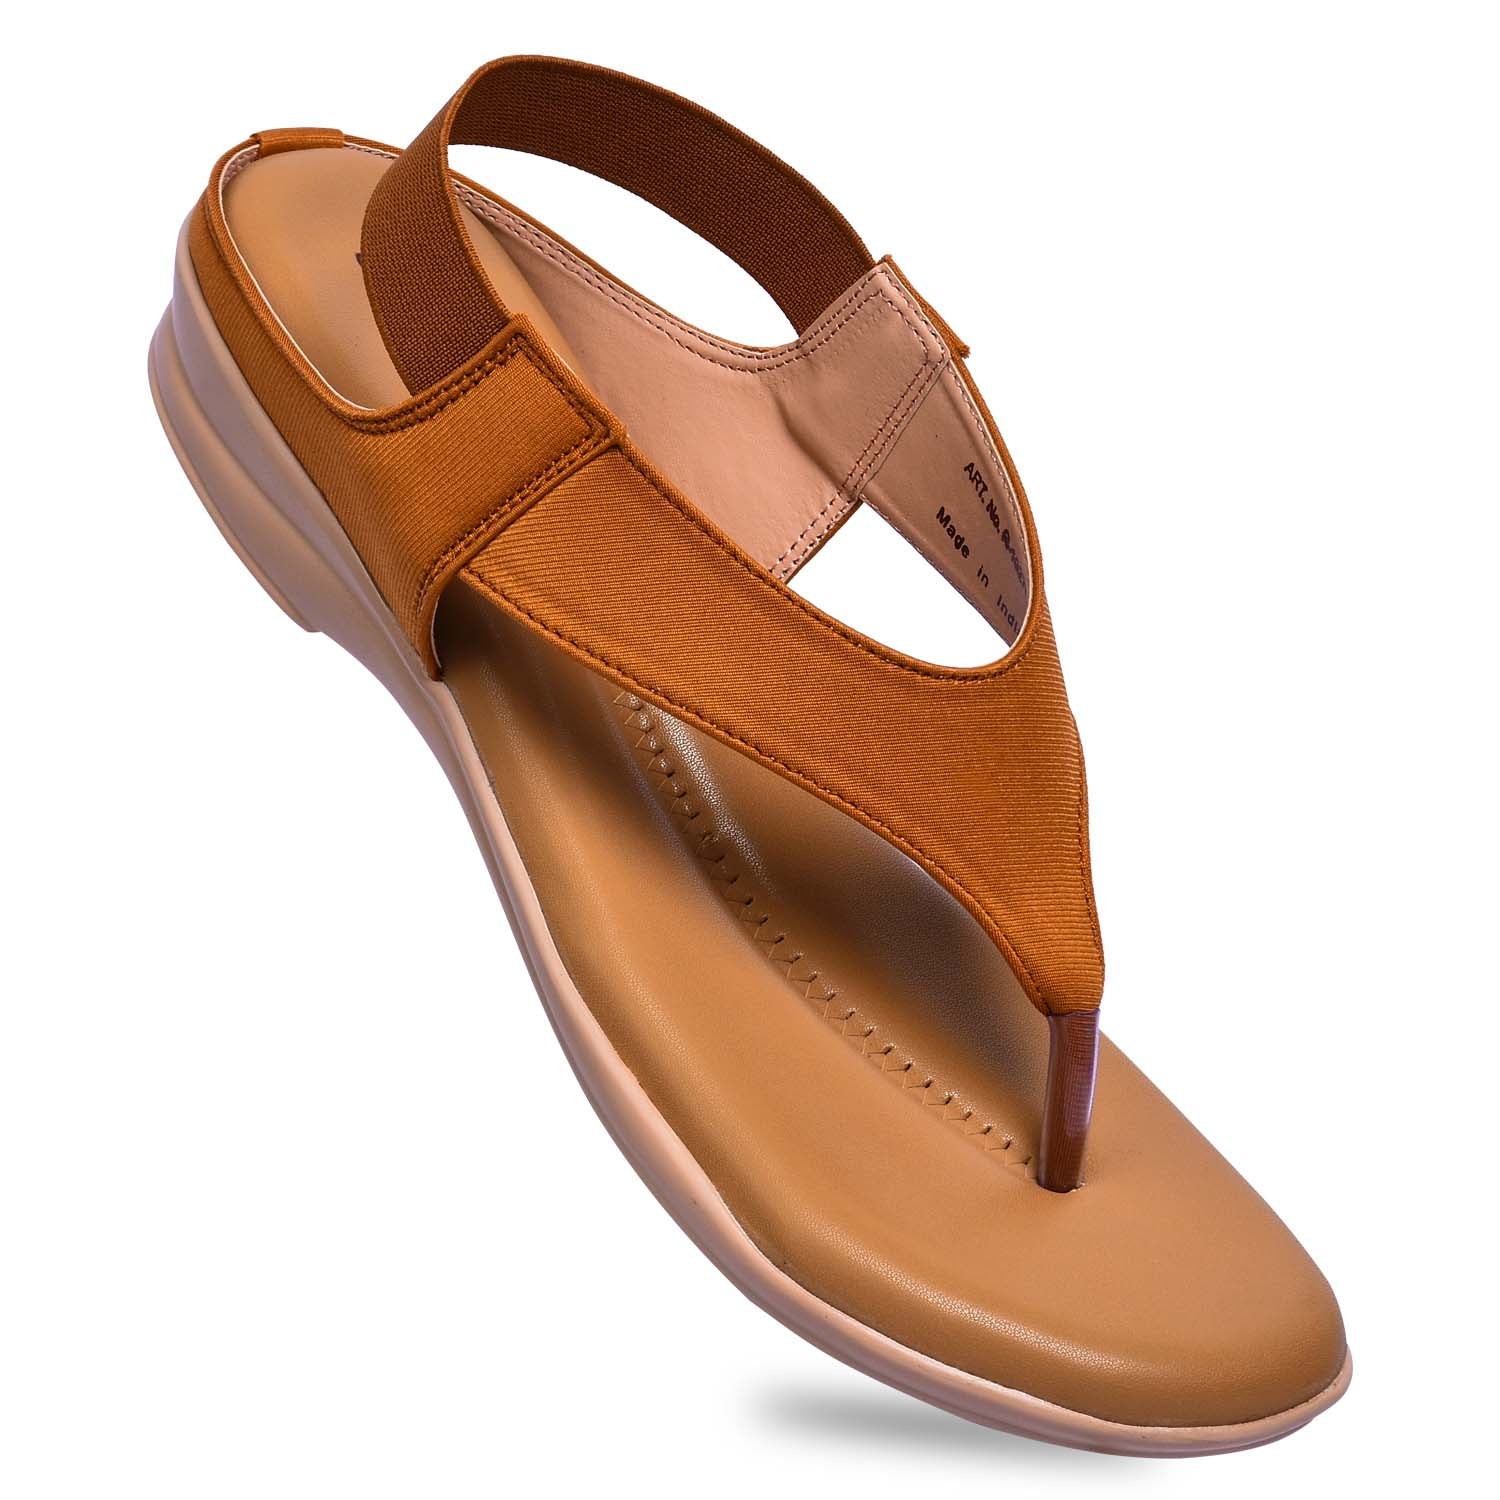 Paragon R1027L Women Sandals | Casual &amp; Formal Sandals | Stylish, Comfortable &amp; Durable | For Daily &amp; Occasion Wear